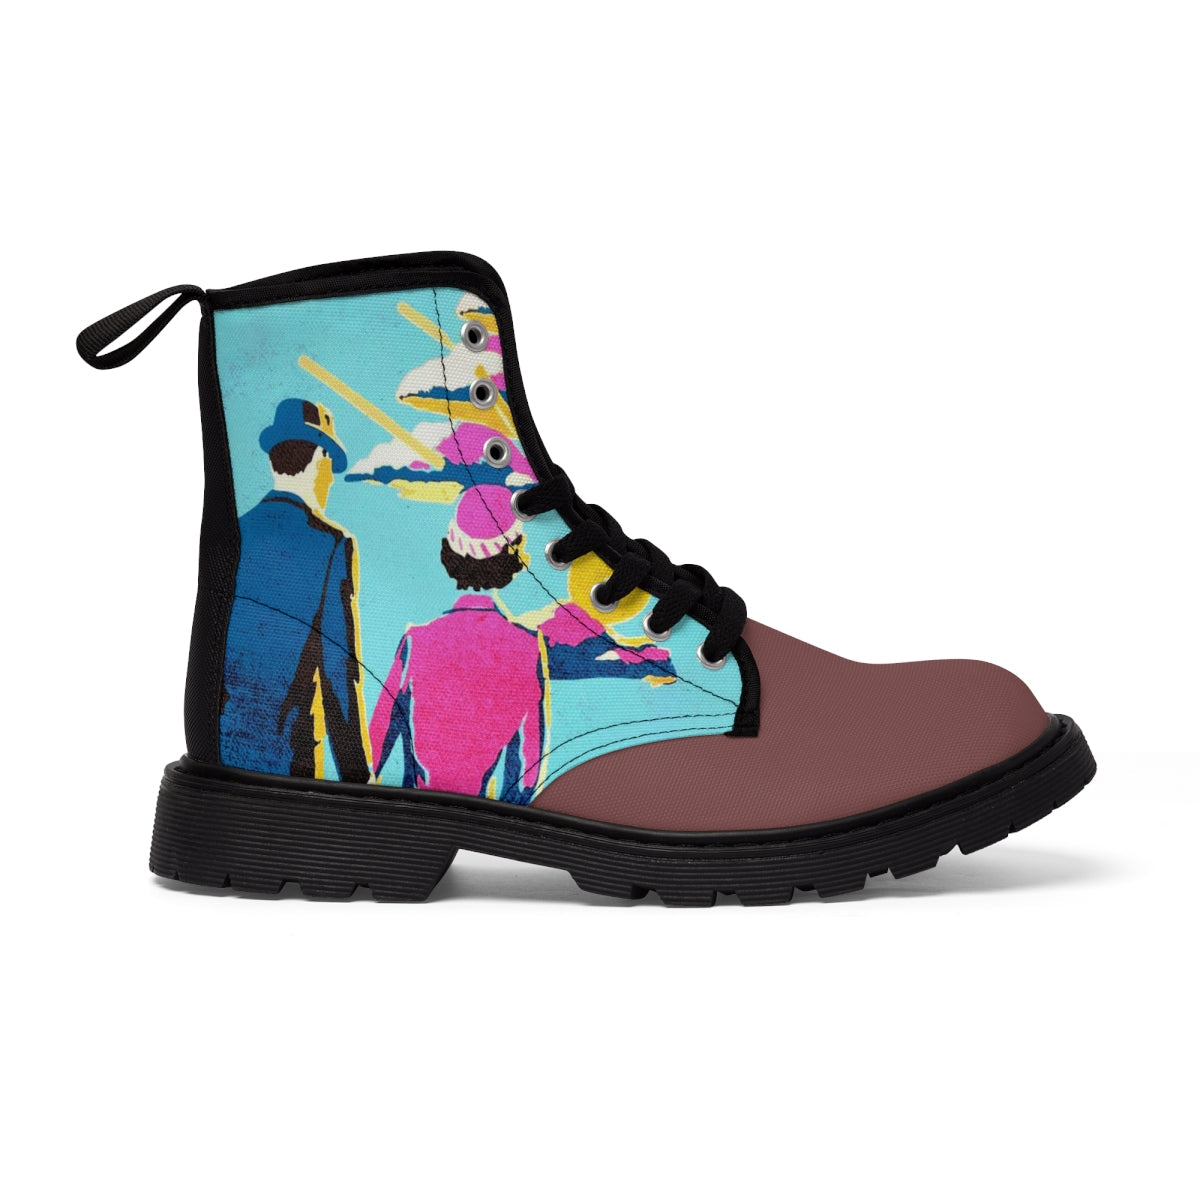 Handbook For The Recently Deceased Boots | Artsy Beetlejuice Canvas Boots (Women's sizes)